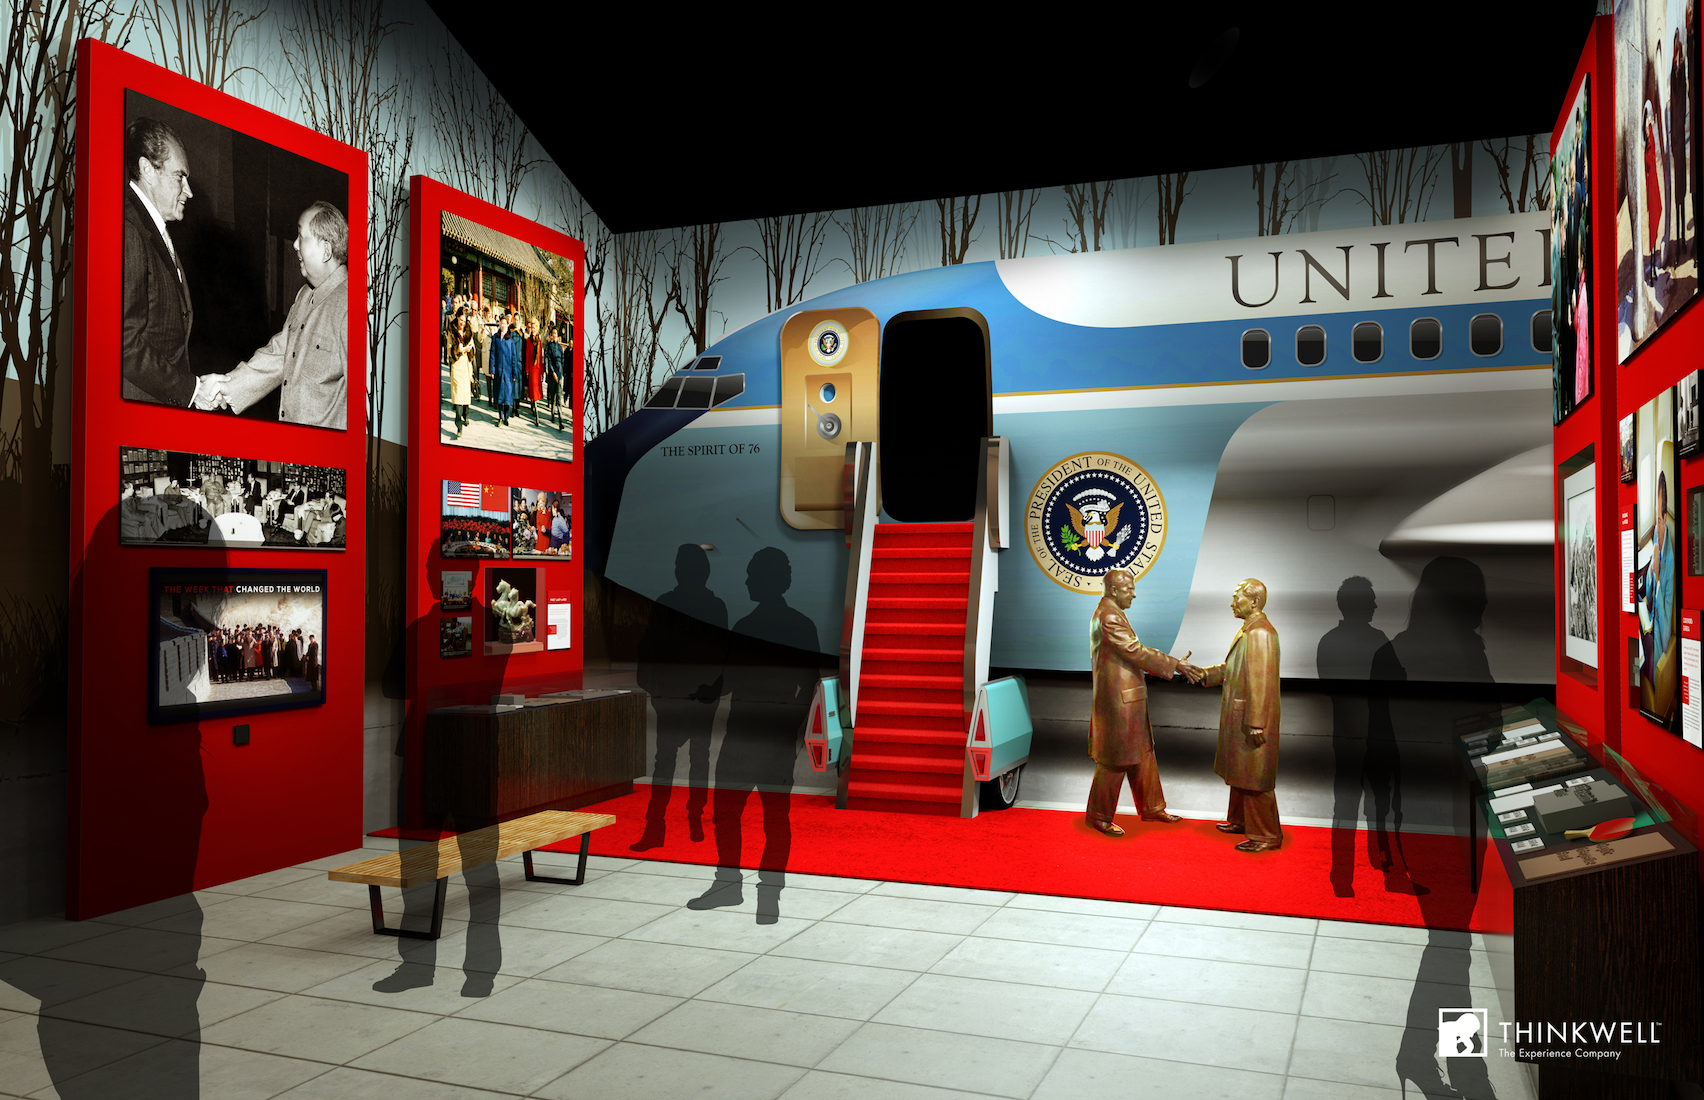 Highlights of the New Nixon Library and Museum